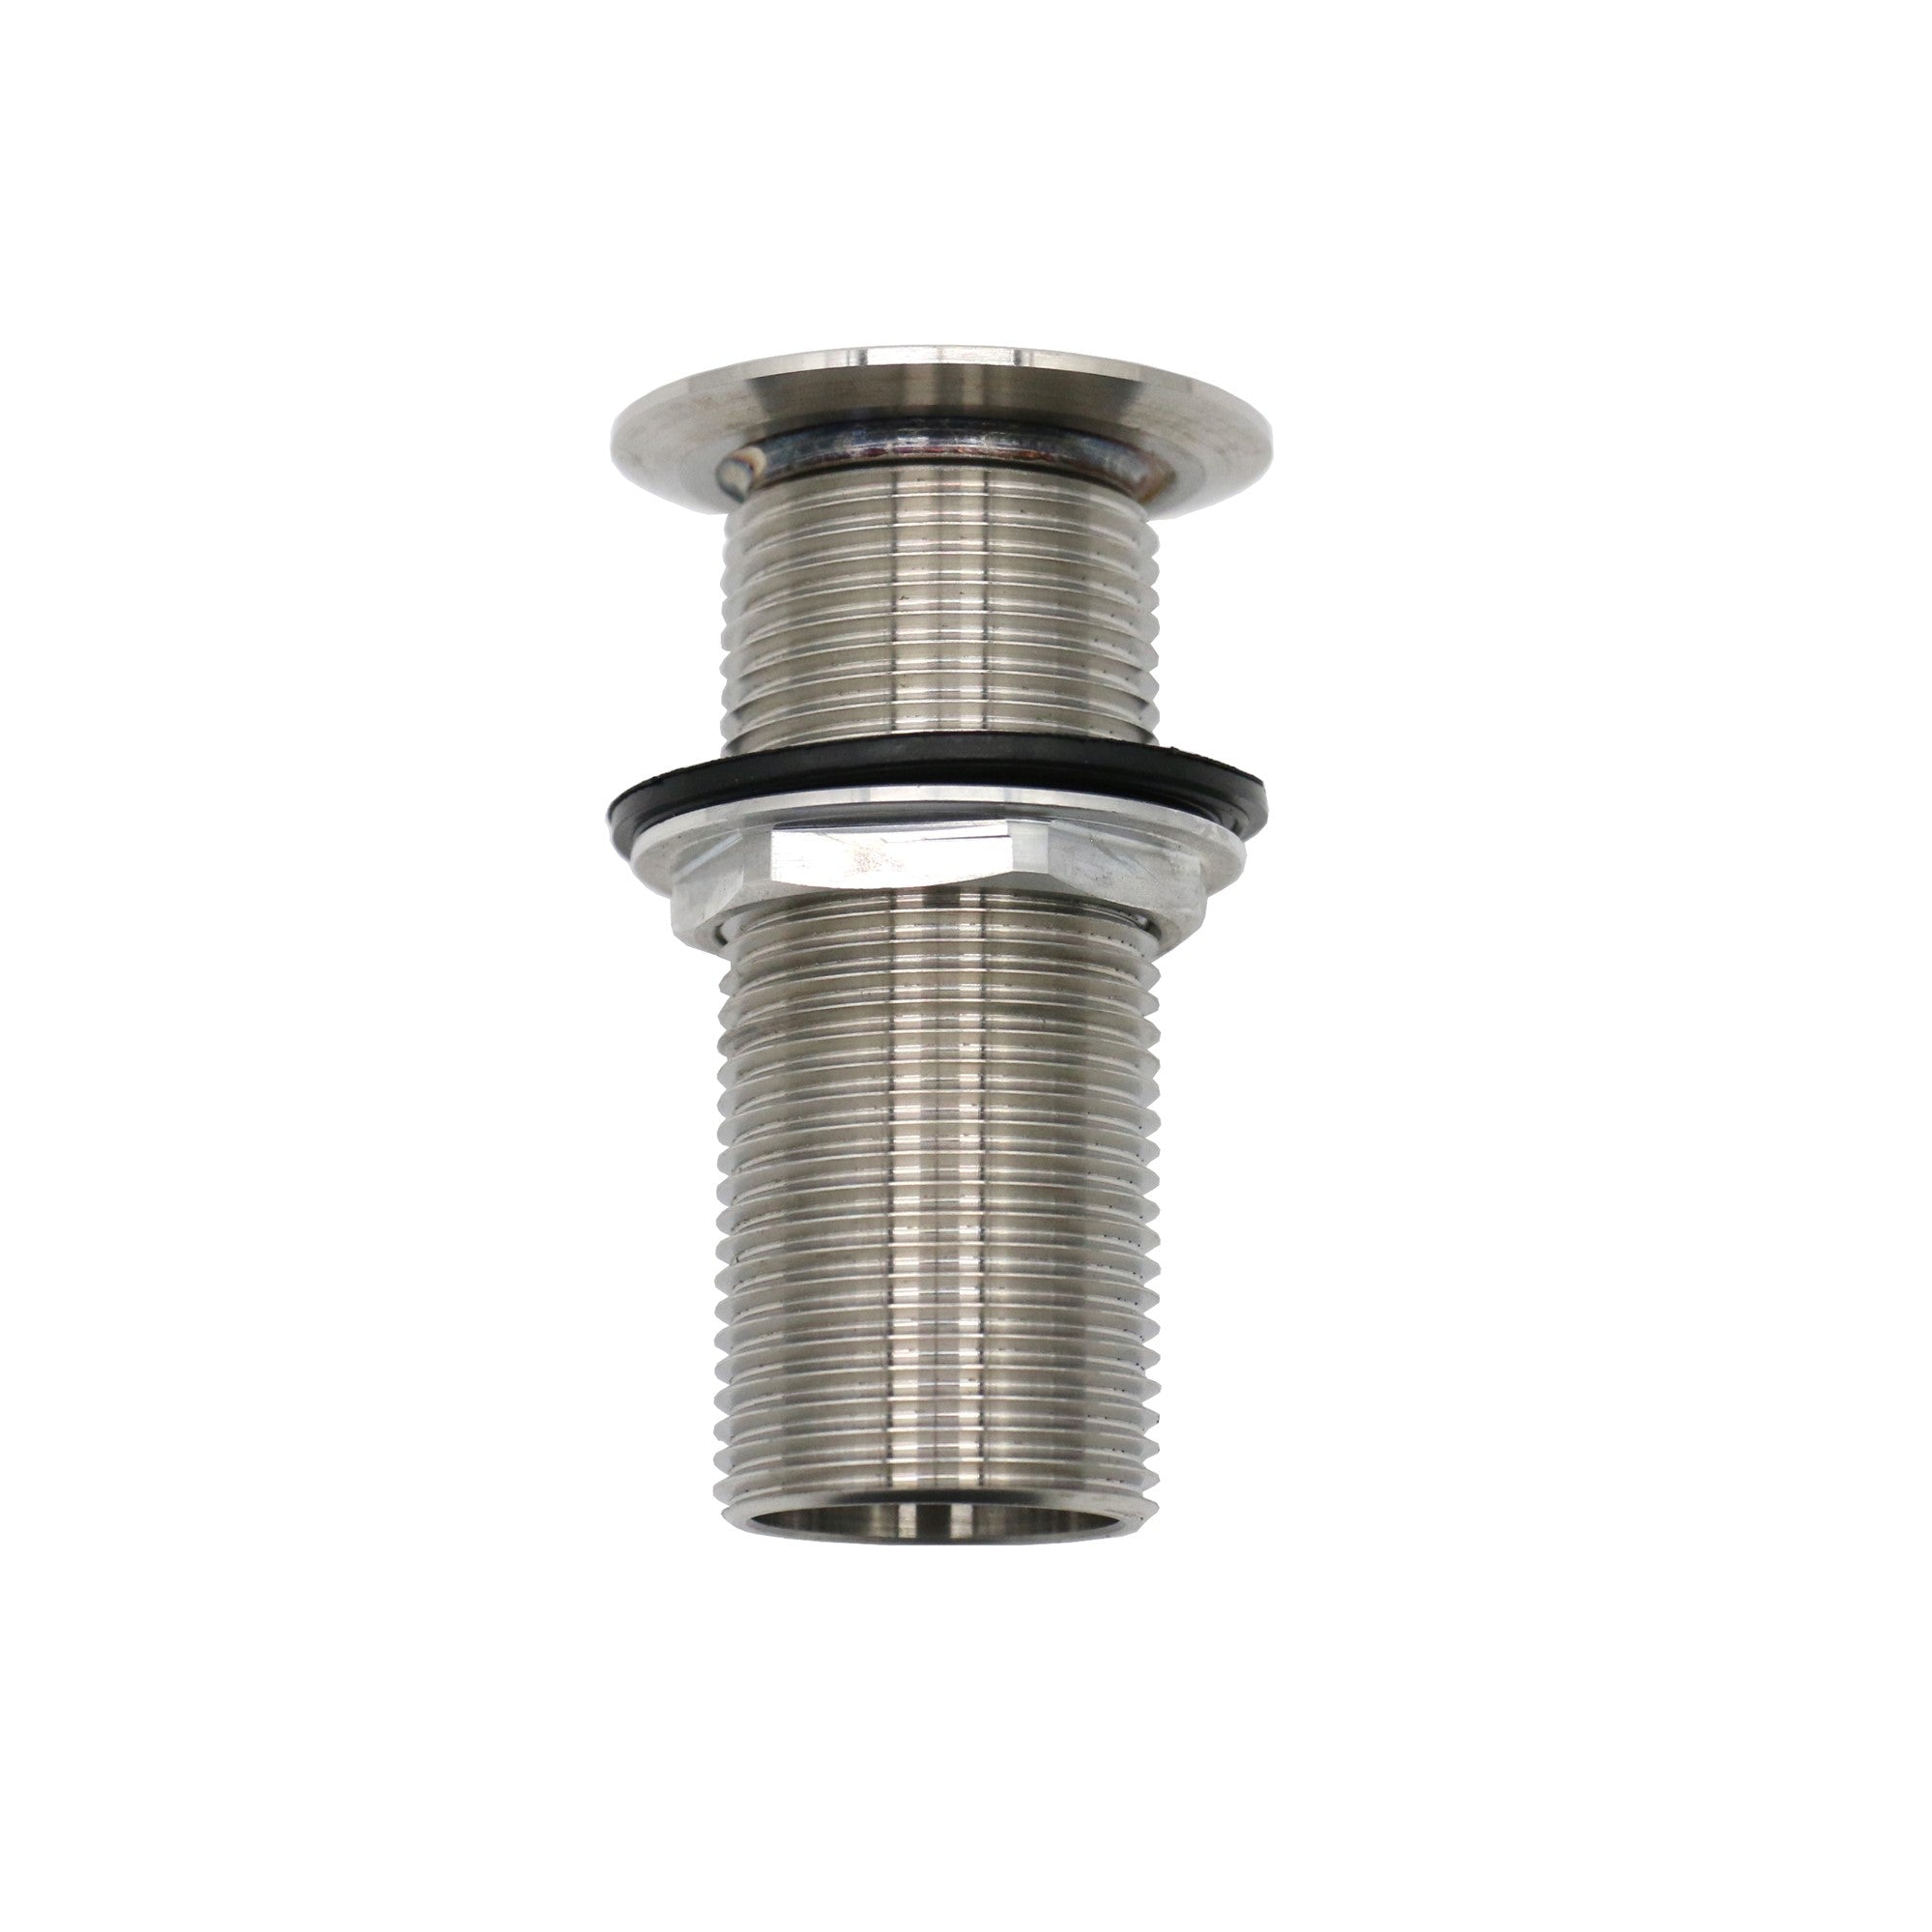 Leyso AA-144 Stainless Steel Bar Sink Drain 1" Nominal Pipe Size 1" NPS Thread for 1-3/8" Sink Opening (3-1/4" Length)